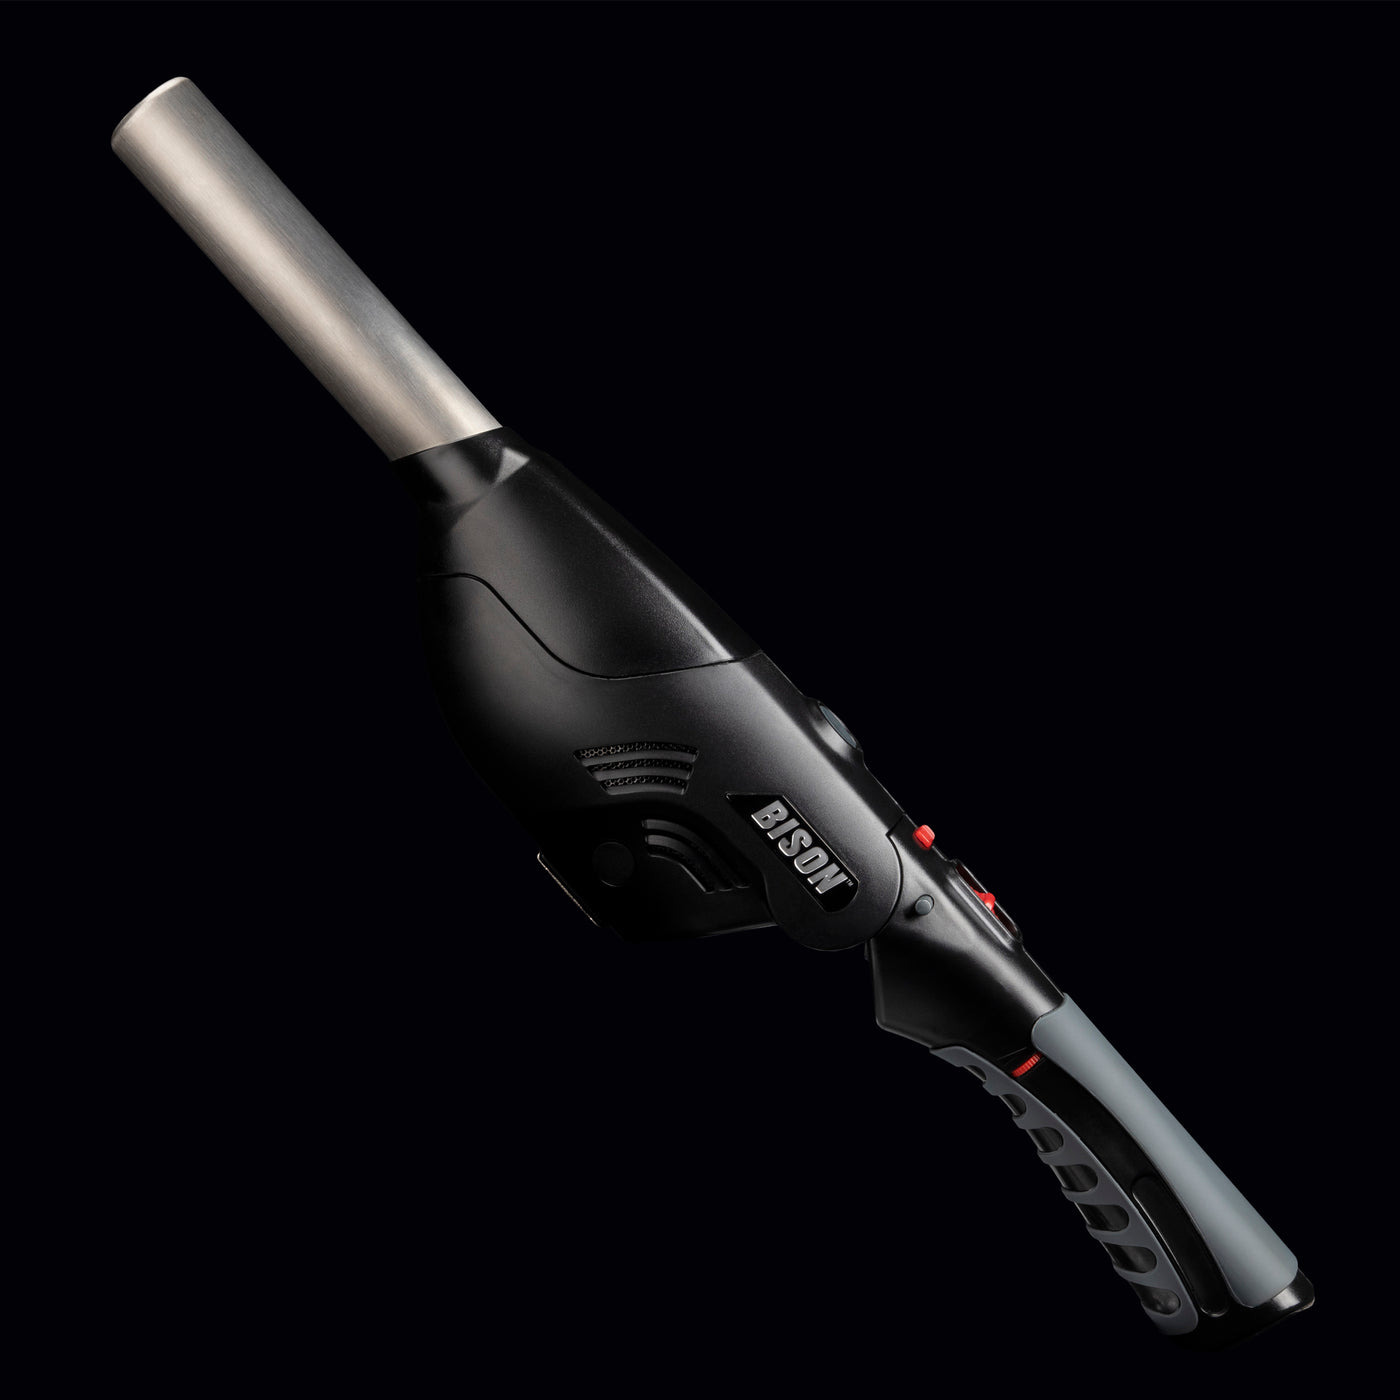 Airlighter 520 with straight handle pointing diagonally up to the left